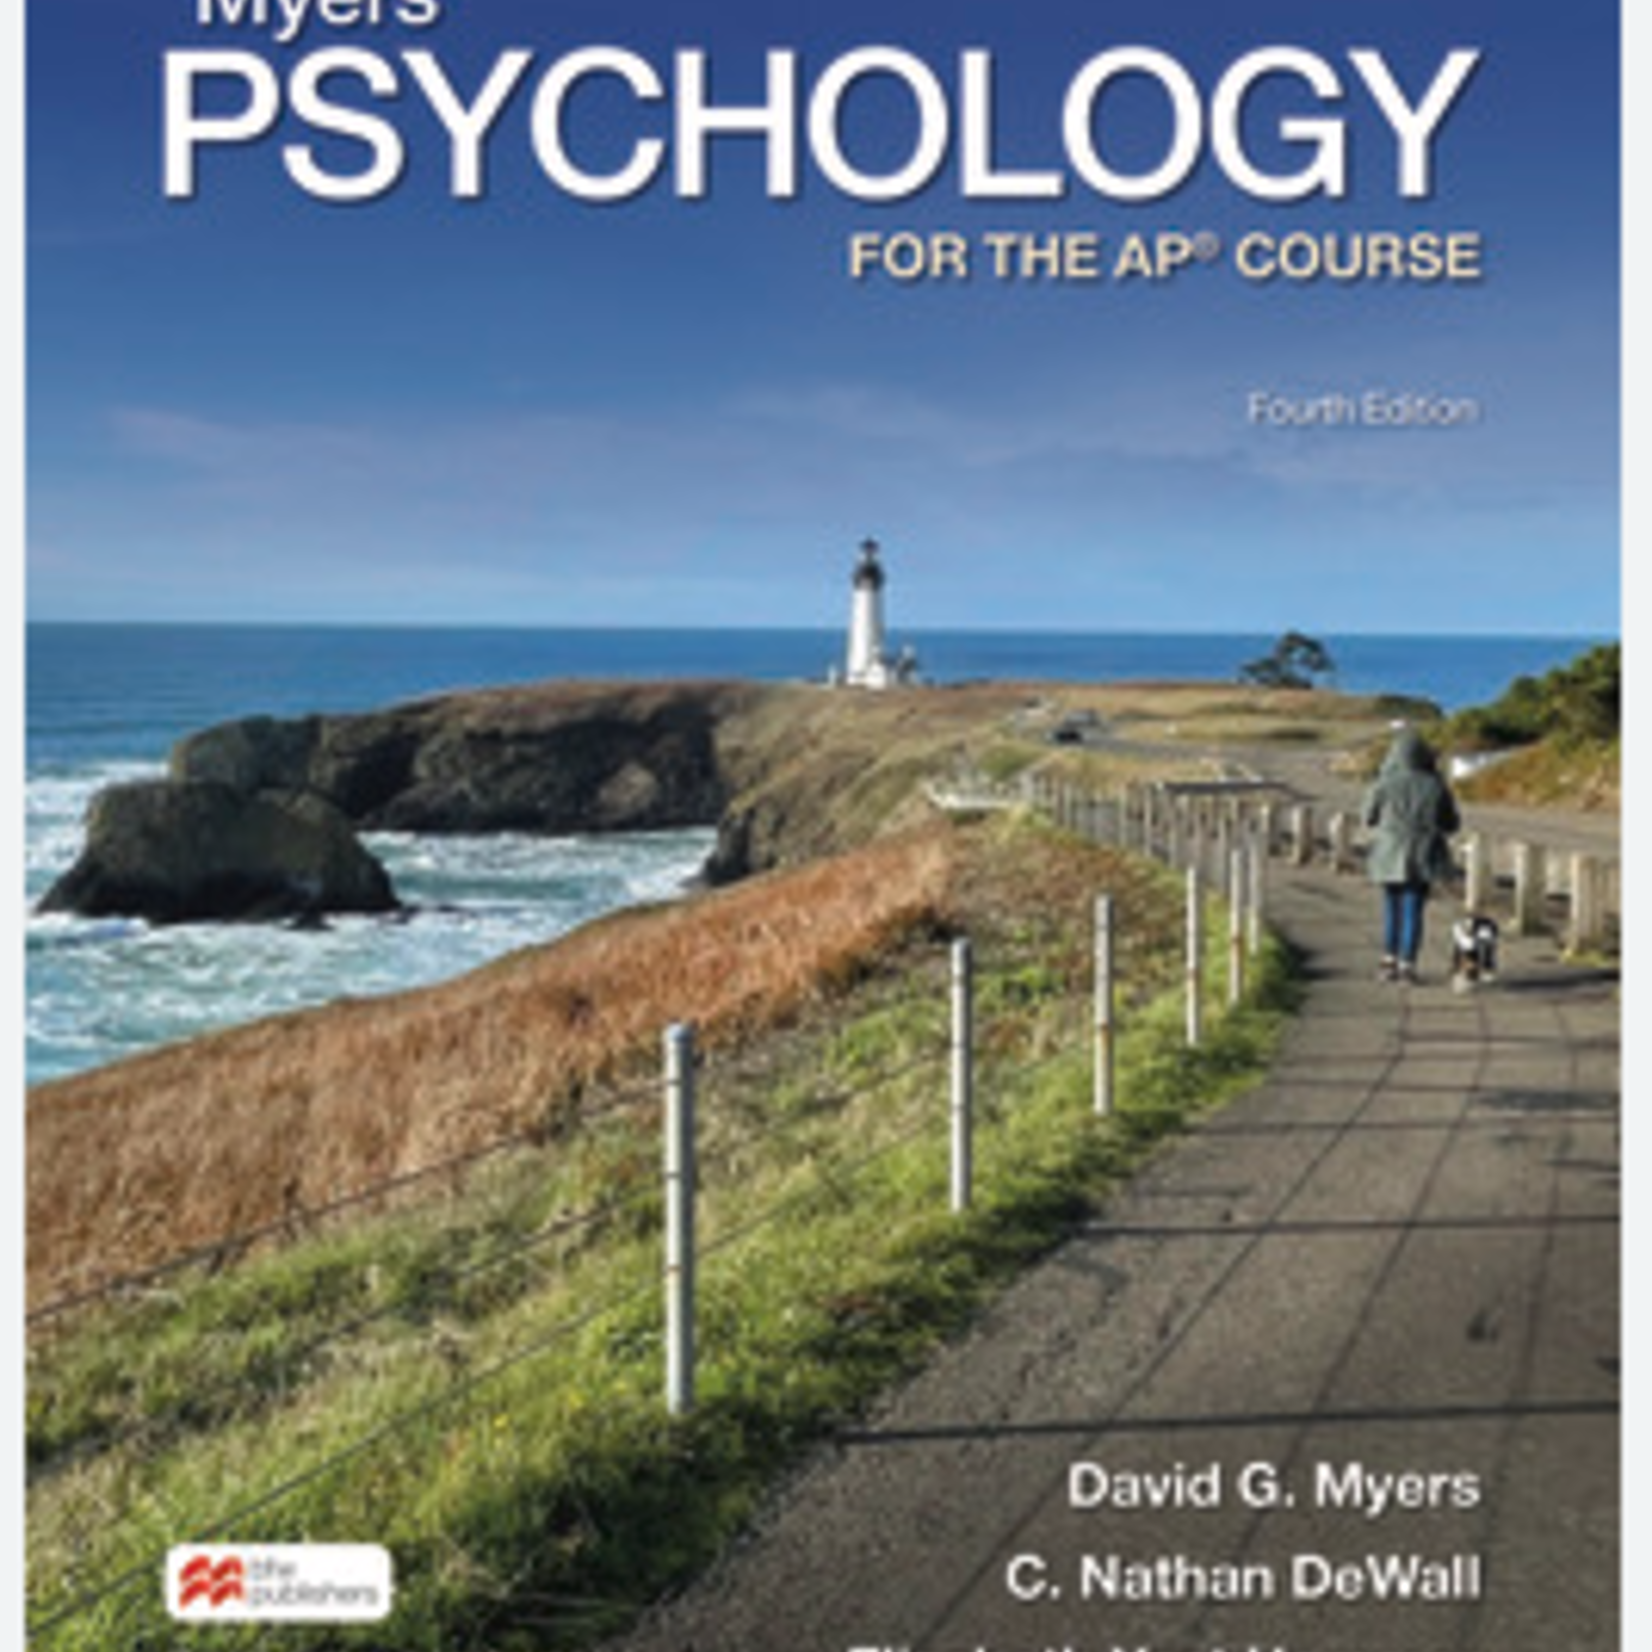 Myers' Psychology, 4th edition